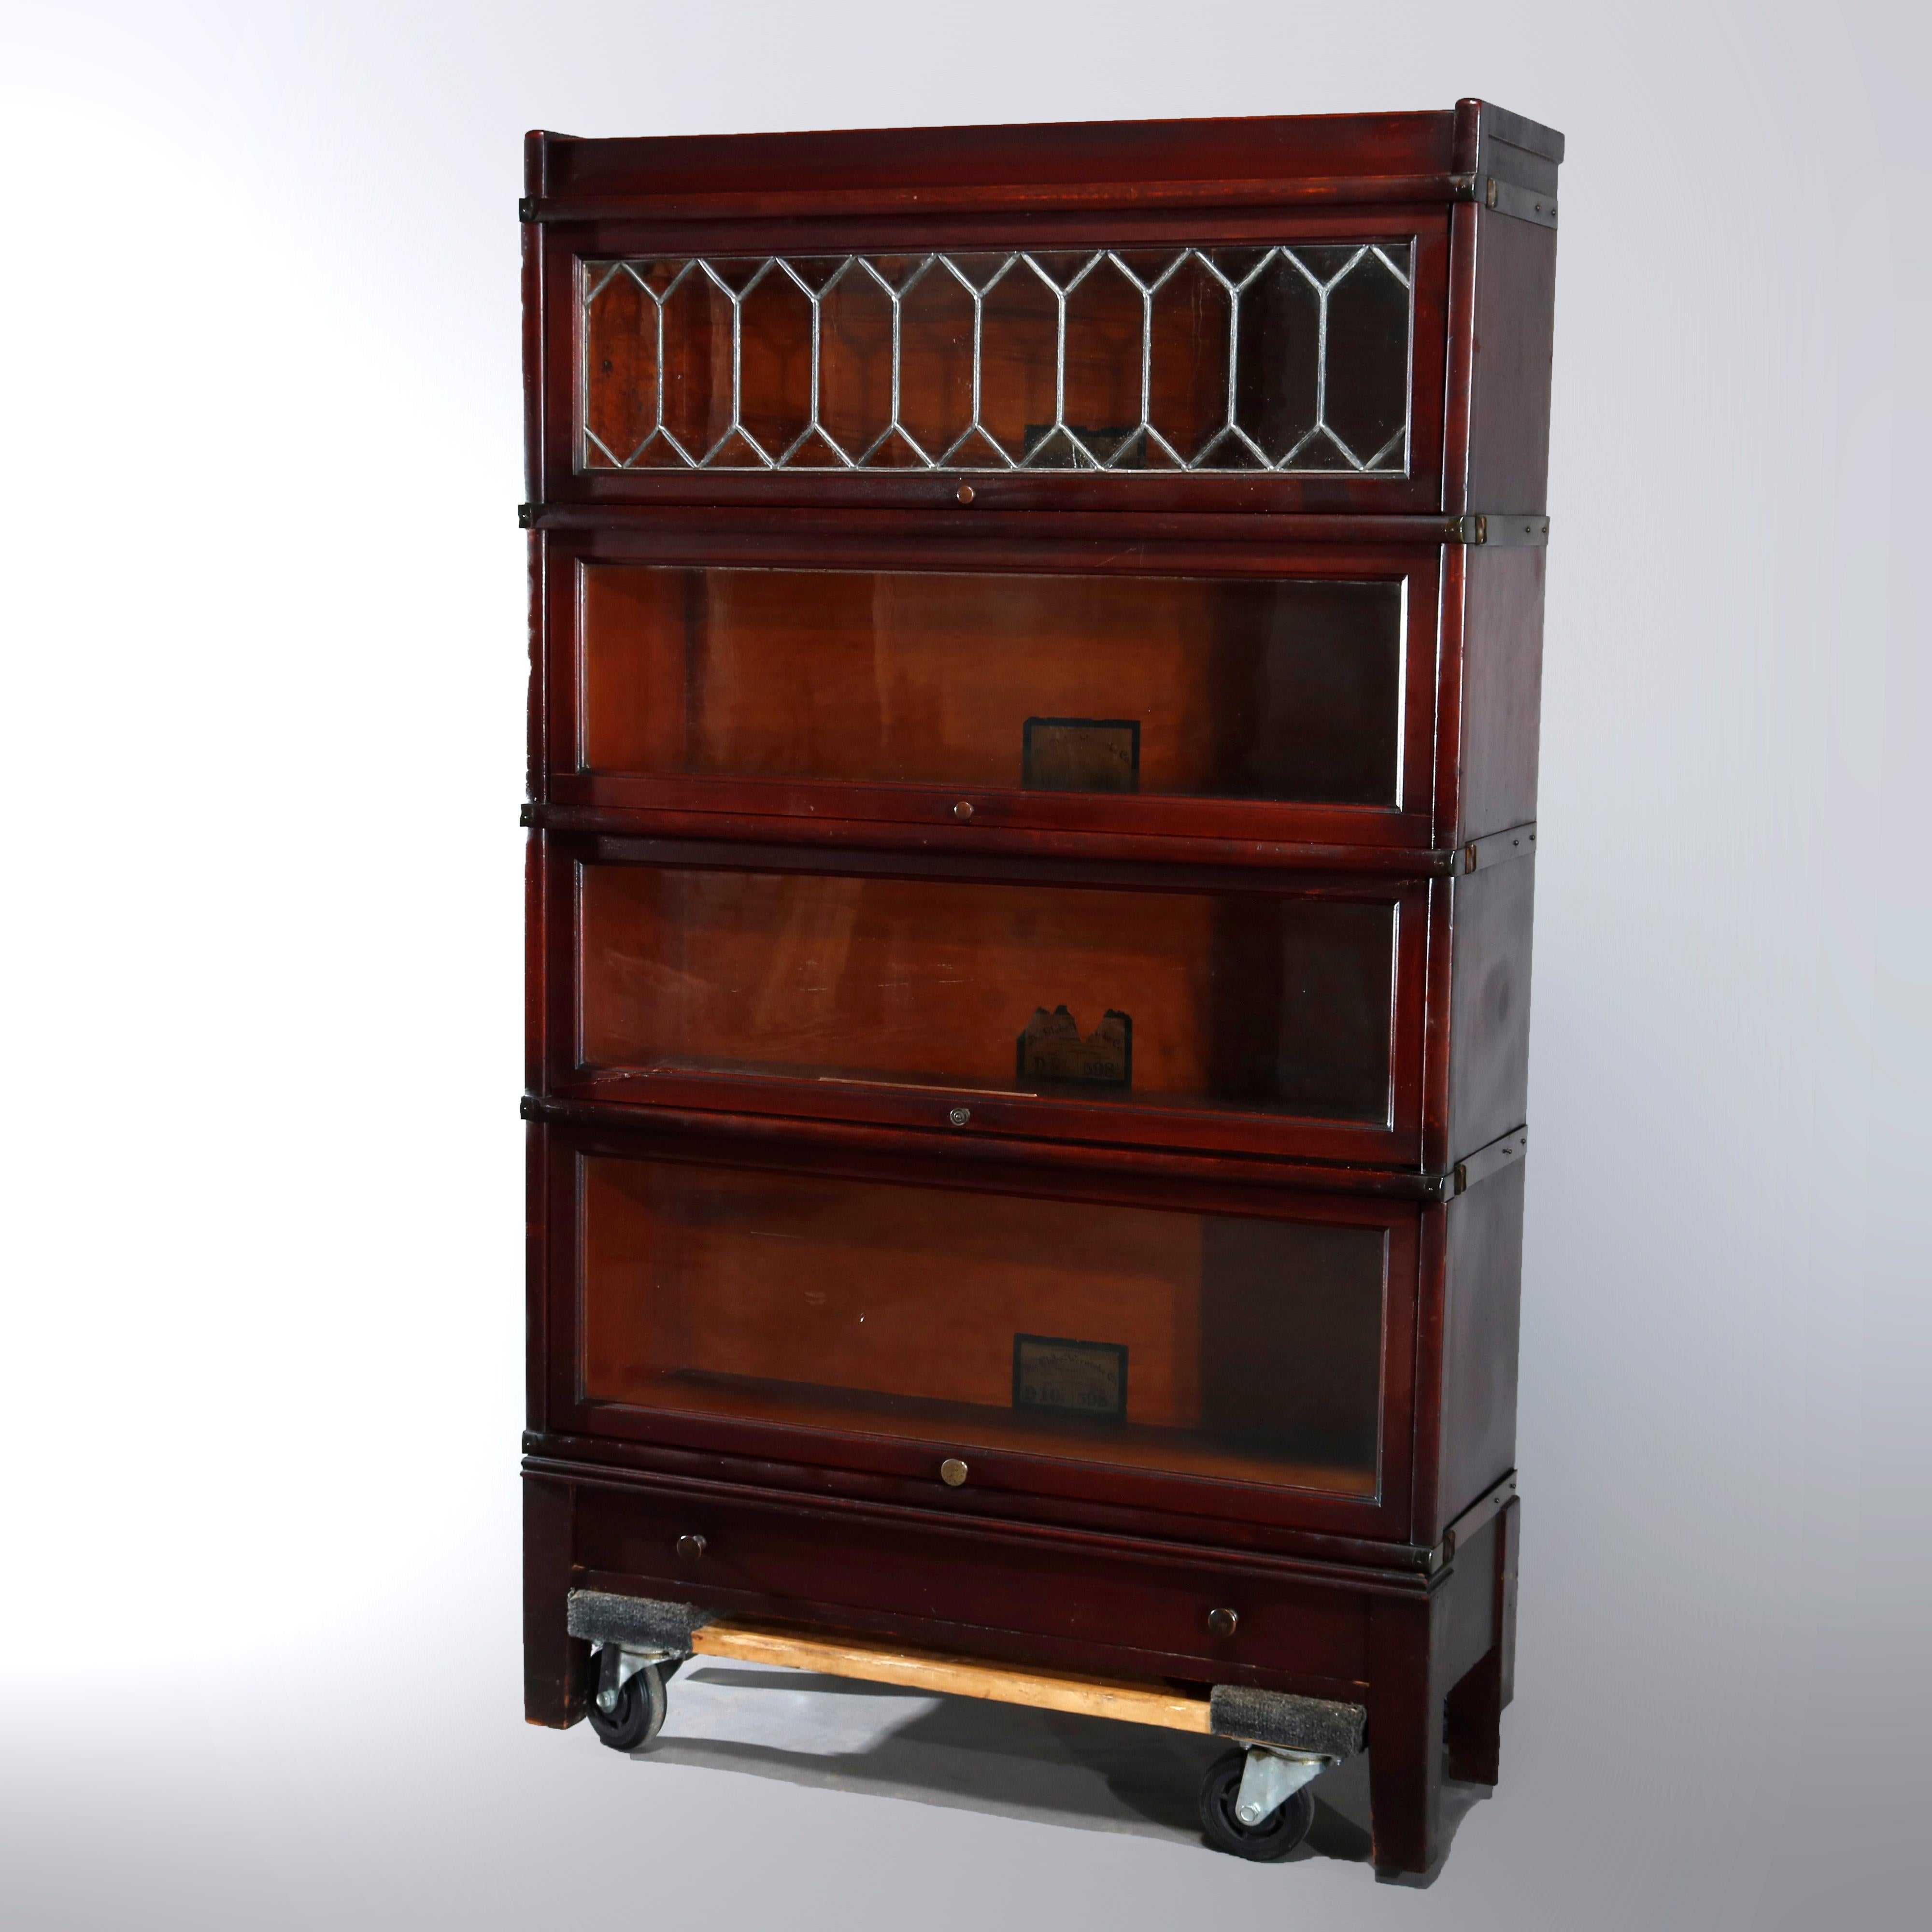 An antique Arts & Crafts Barrister bookcase by Globe Wernicke offers mahogany construction with four stacks, the top having leaded glass door, raised on square legs and having lower drawer, original labels as photographed, circa 1910.

Measures: